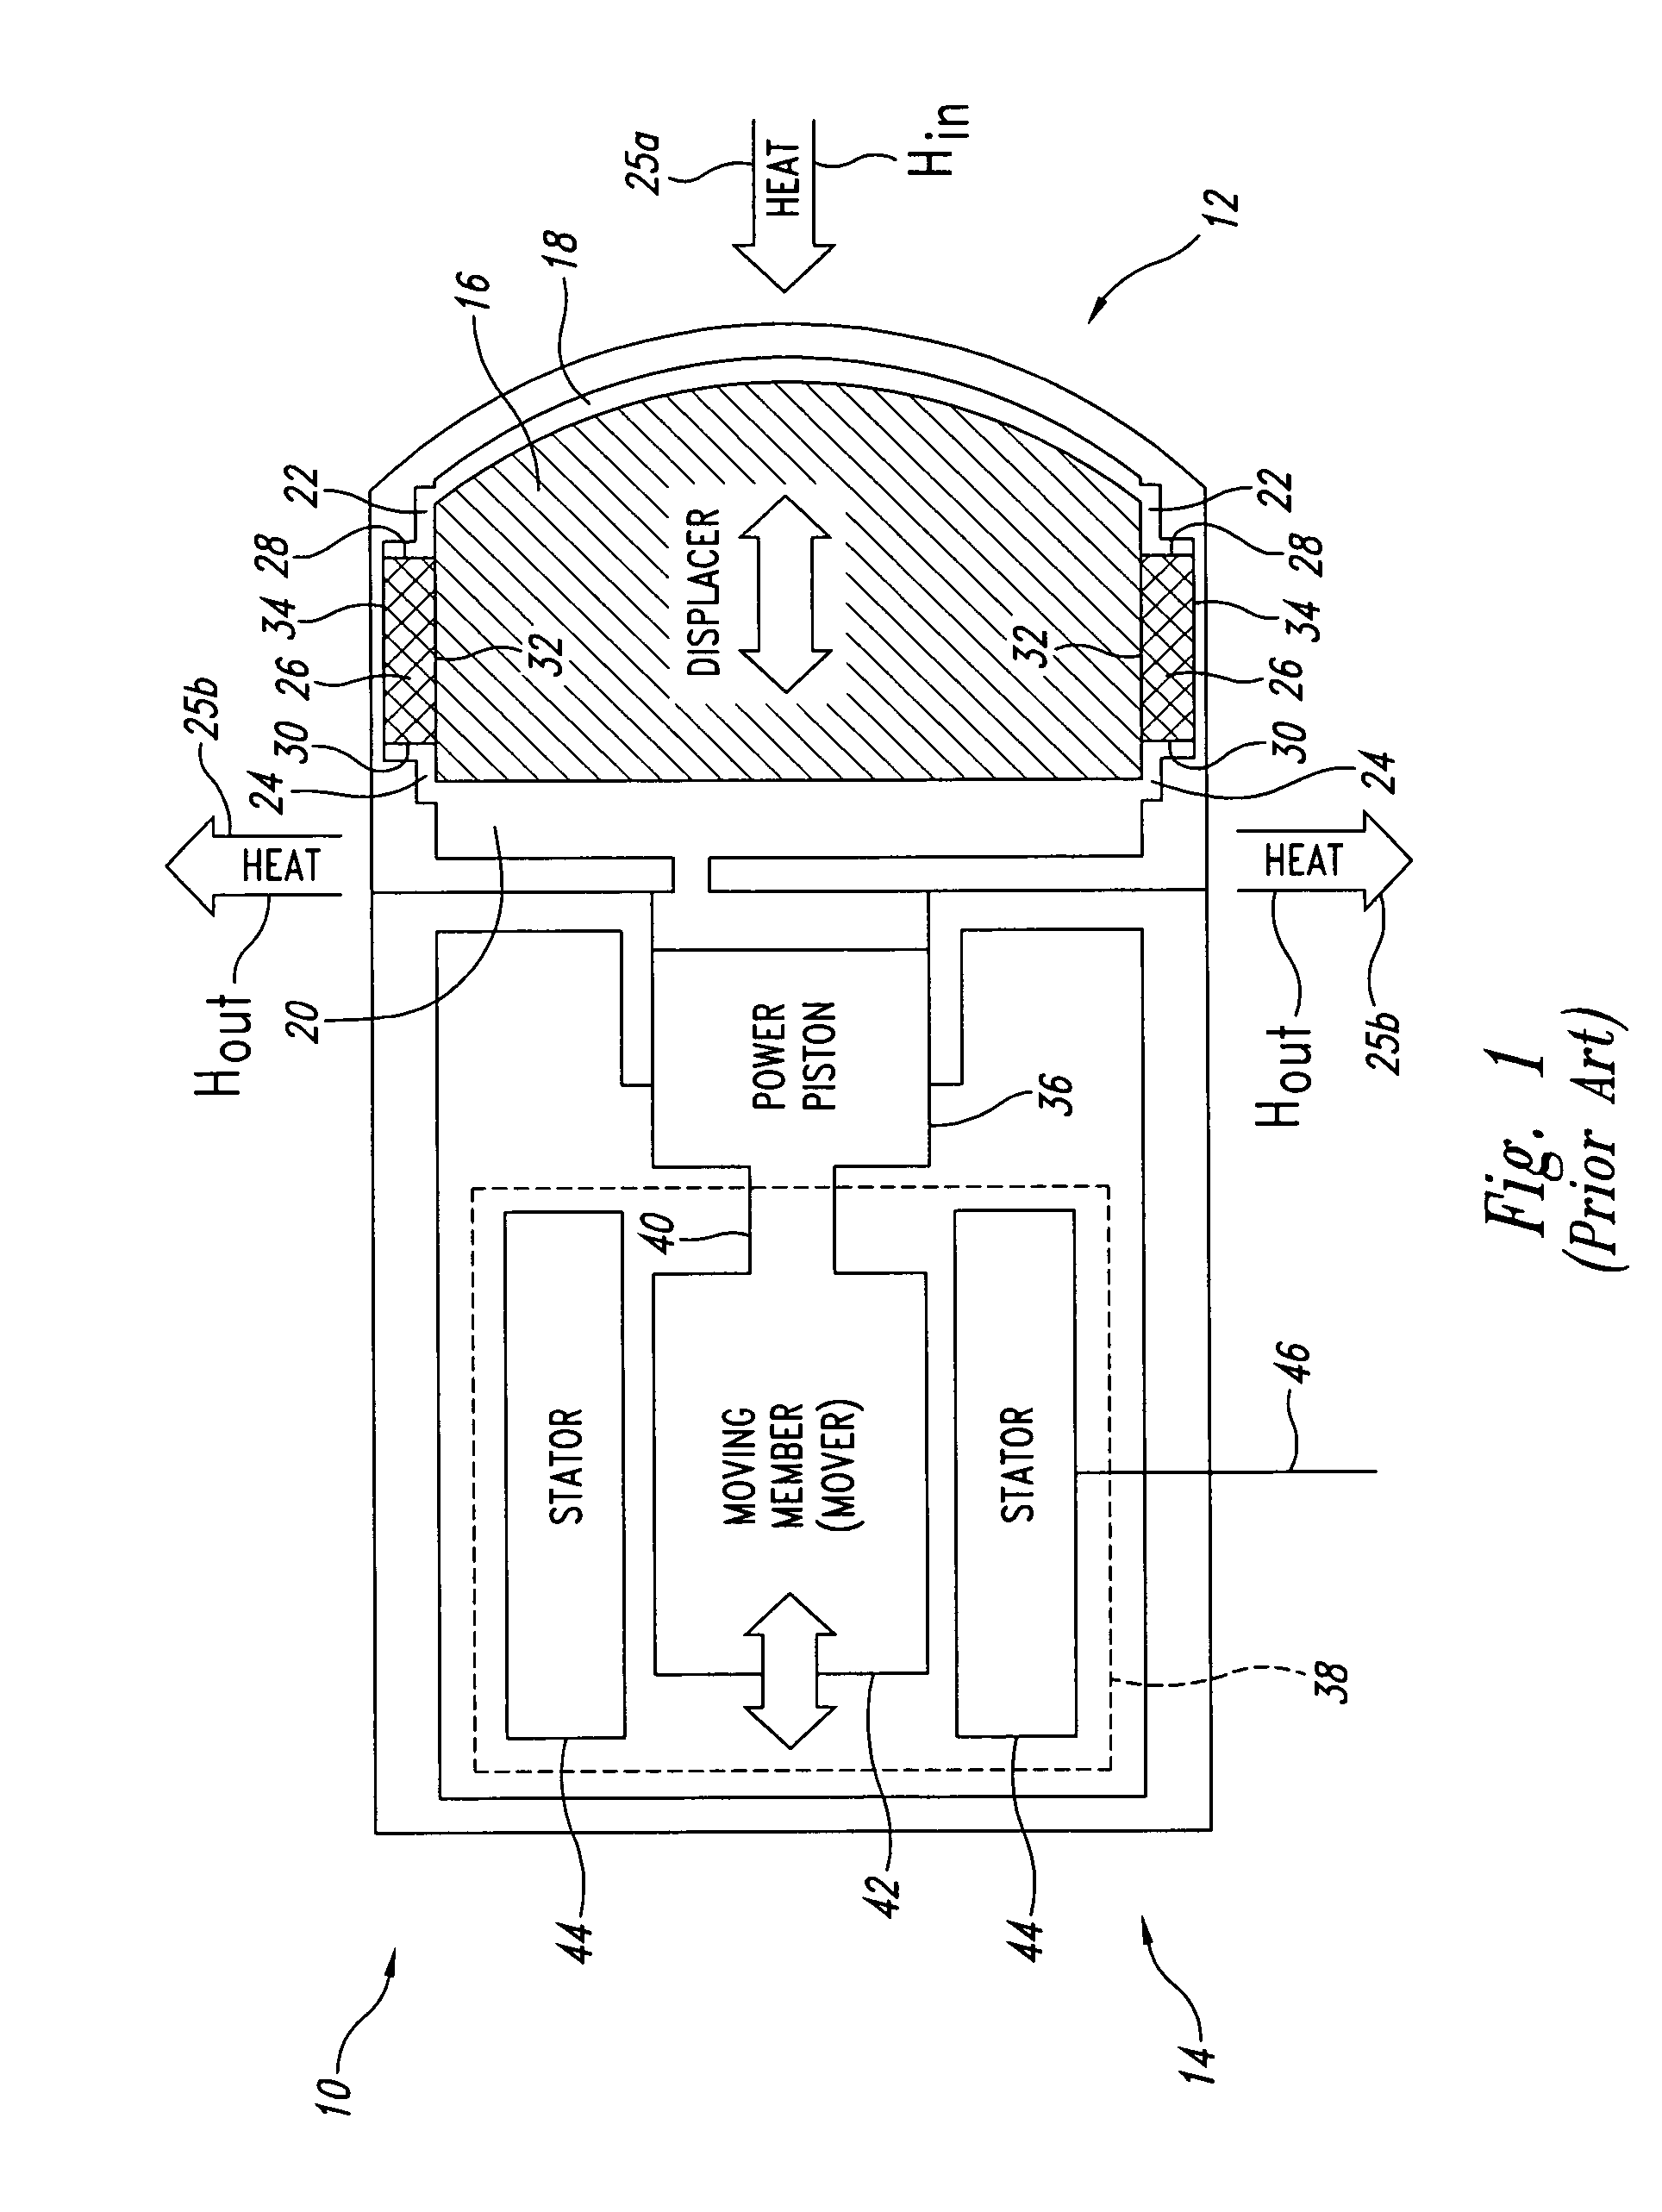 Channelized stratified heat exchangers system and method